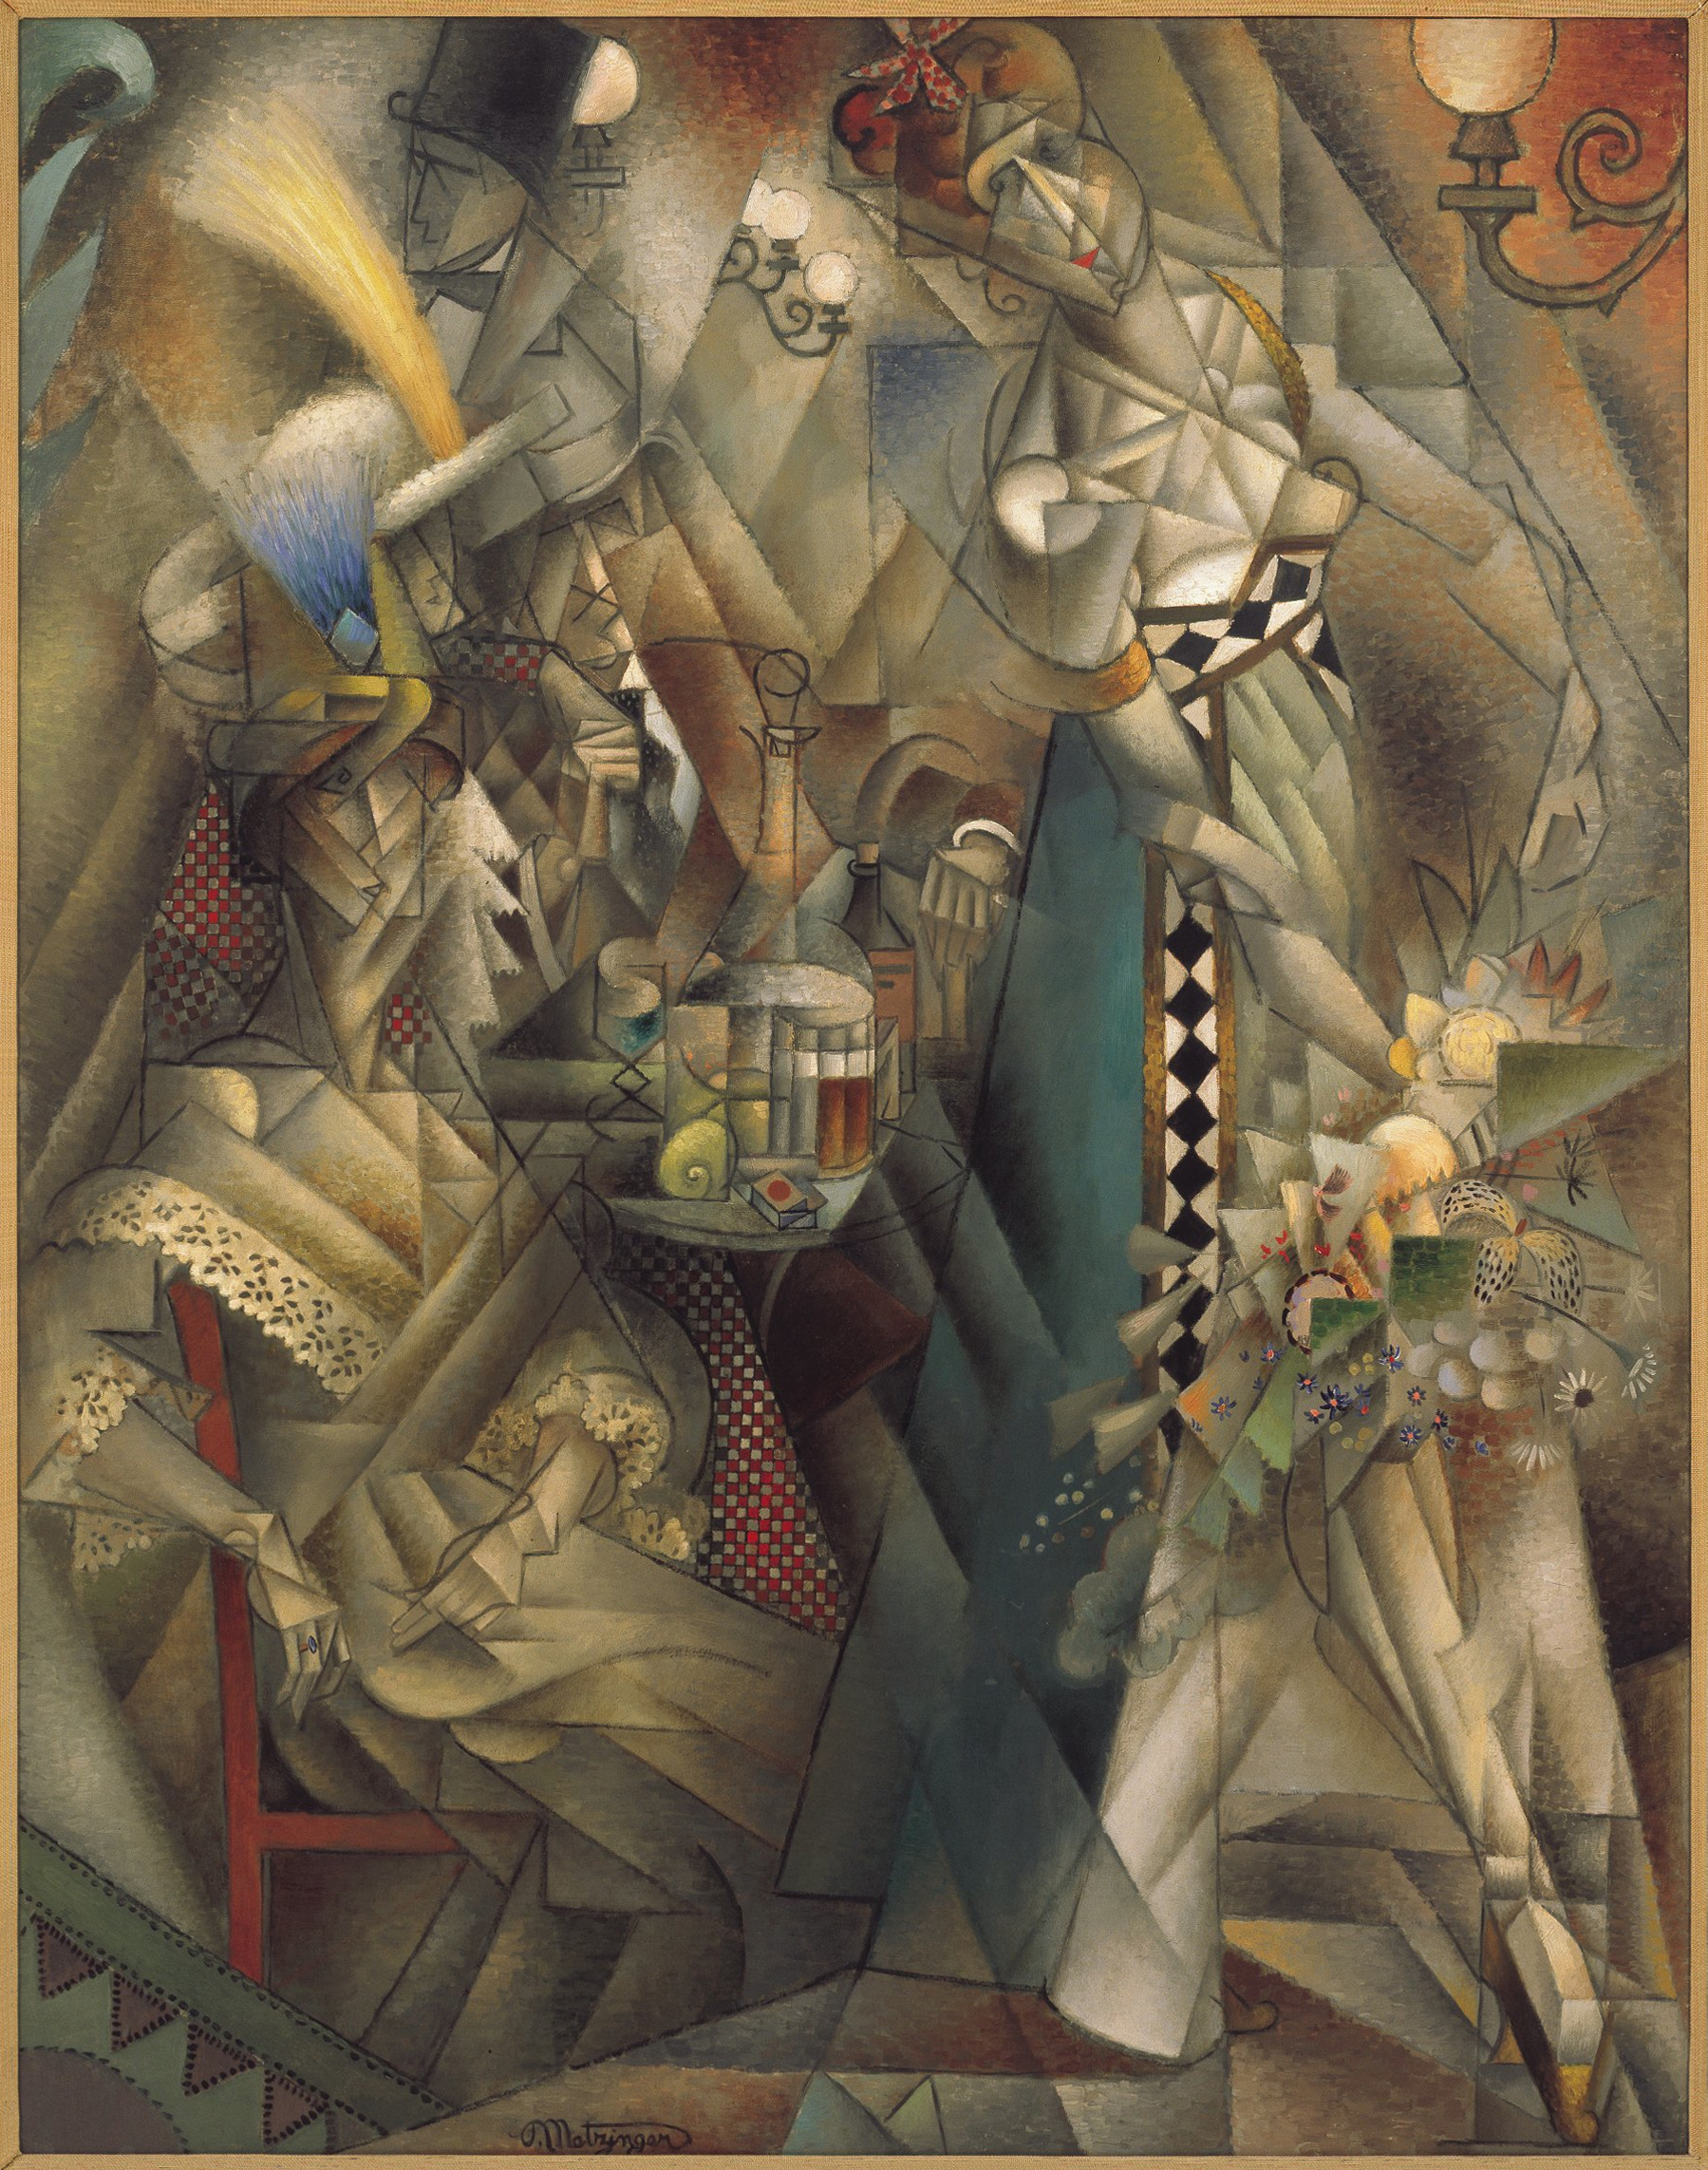 Jean Metzinger, Dancer in a Cafe, 1912, oil on canvas, 57.5 x 45” (Albright-Knox Art Gallery, Buffalo)